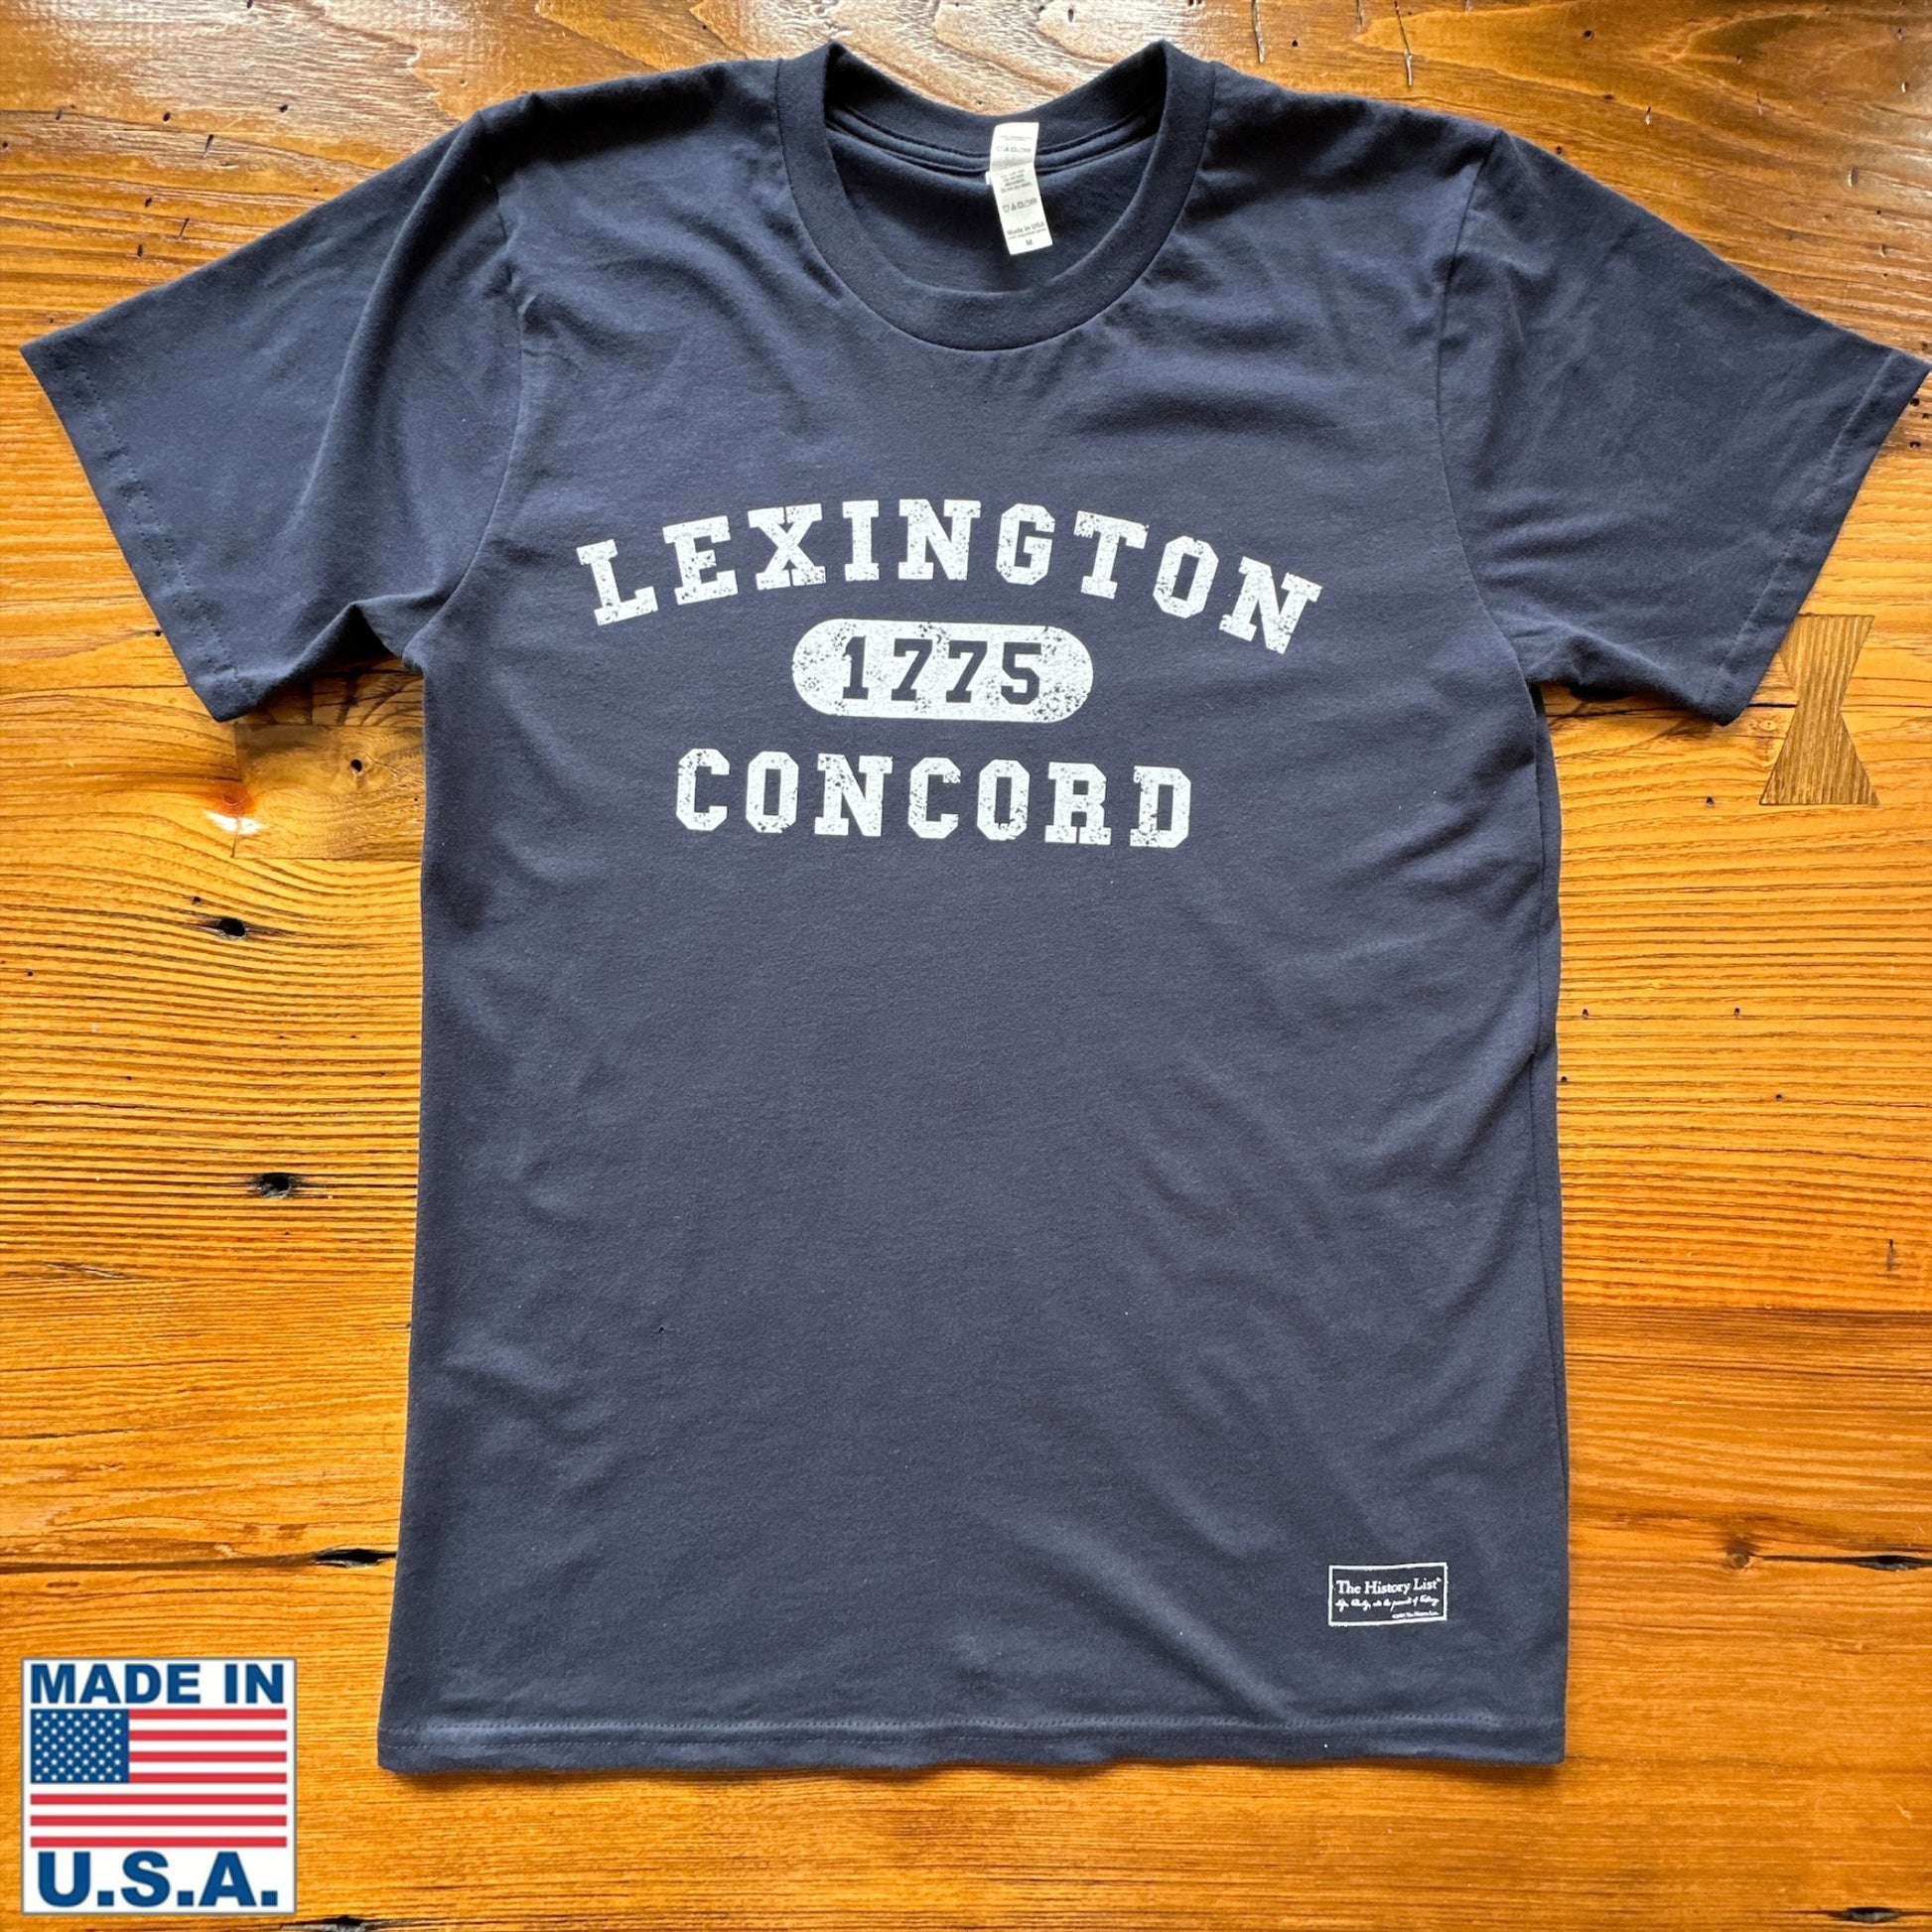 Navy blue 1775 Lexington and Concord Shirt from The History List store